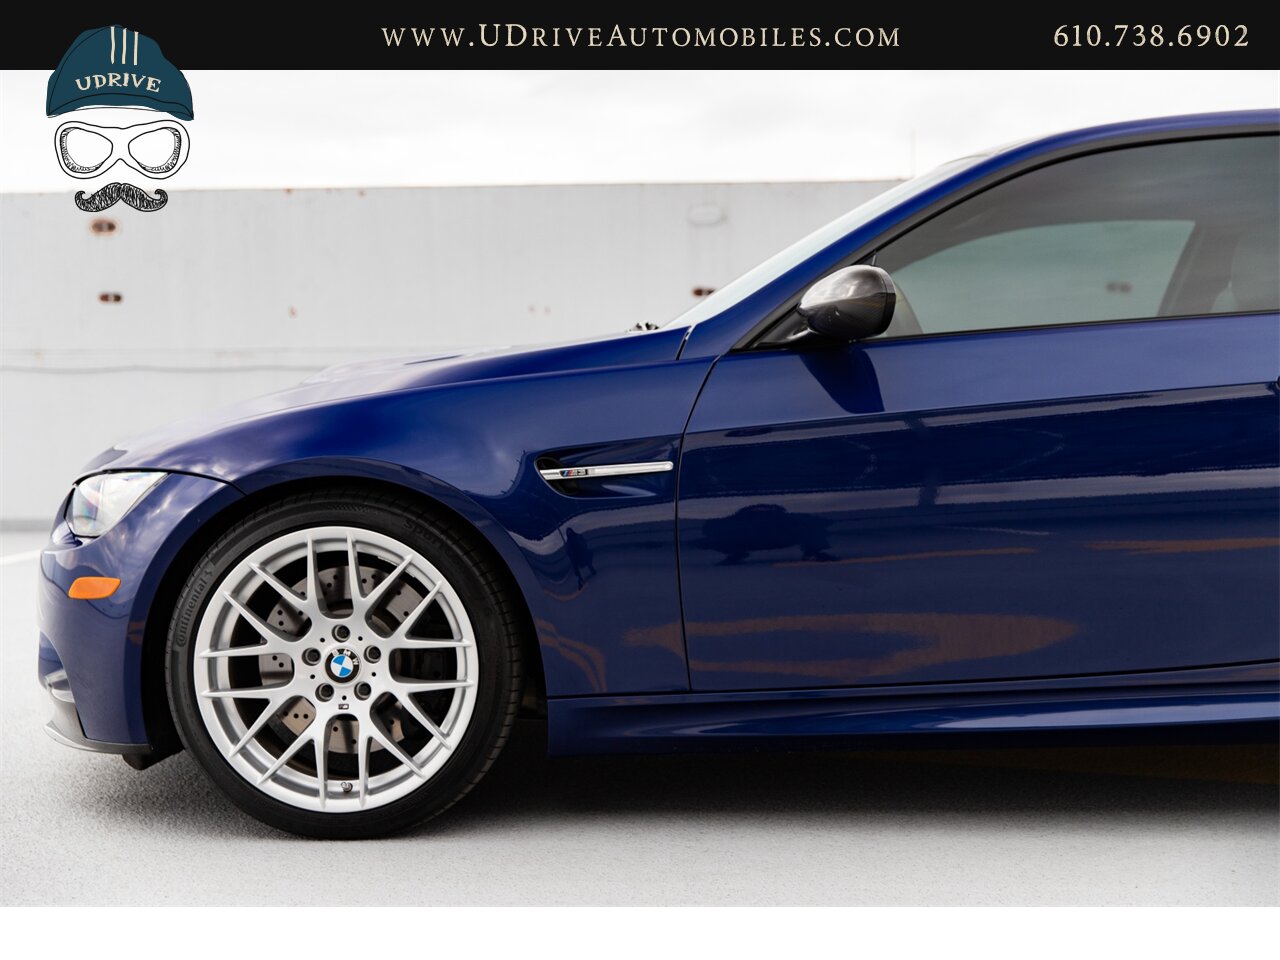 2011 BMW M3 E92 6 Speed Manual Competition Pkg Interlagos Blue  16k Miles Nav PDC EDC Comf Acc - Photo 9 - West Chester, PA 19382